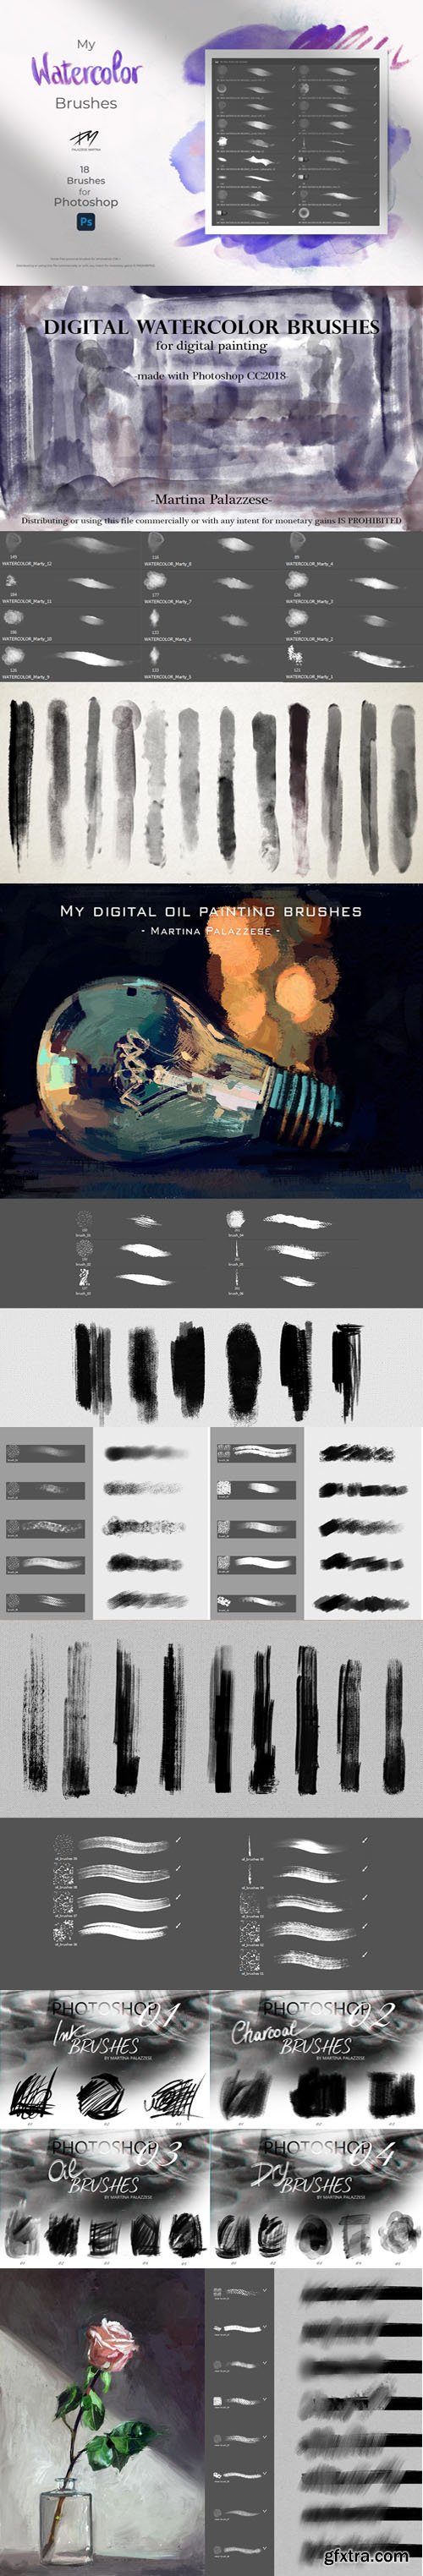 10+ Sets of Drawing Brushes for Photoshop